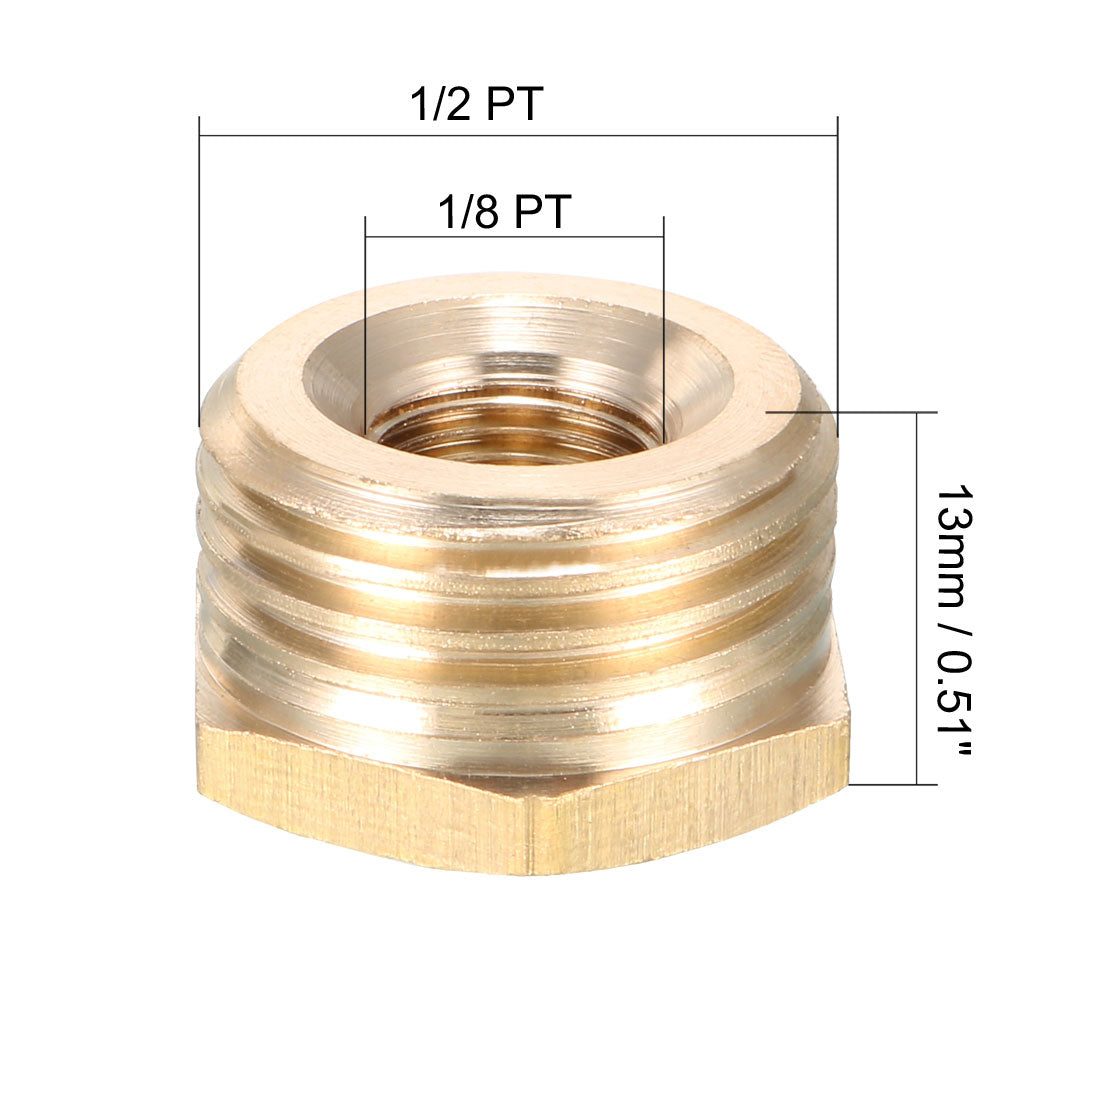 uxcell Uxcell Brass Threaded Pipe Fitting 1/2 PT Male x 1/8 PT Female Hex Bushing Adapter 3pcs